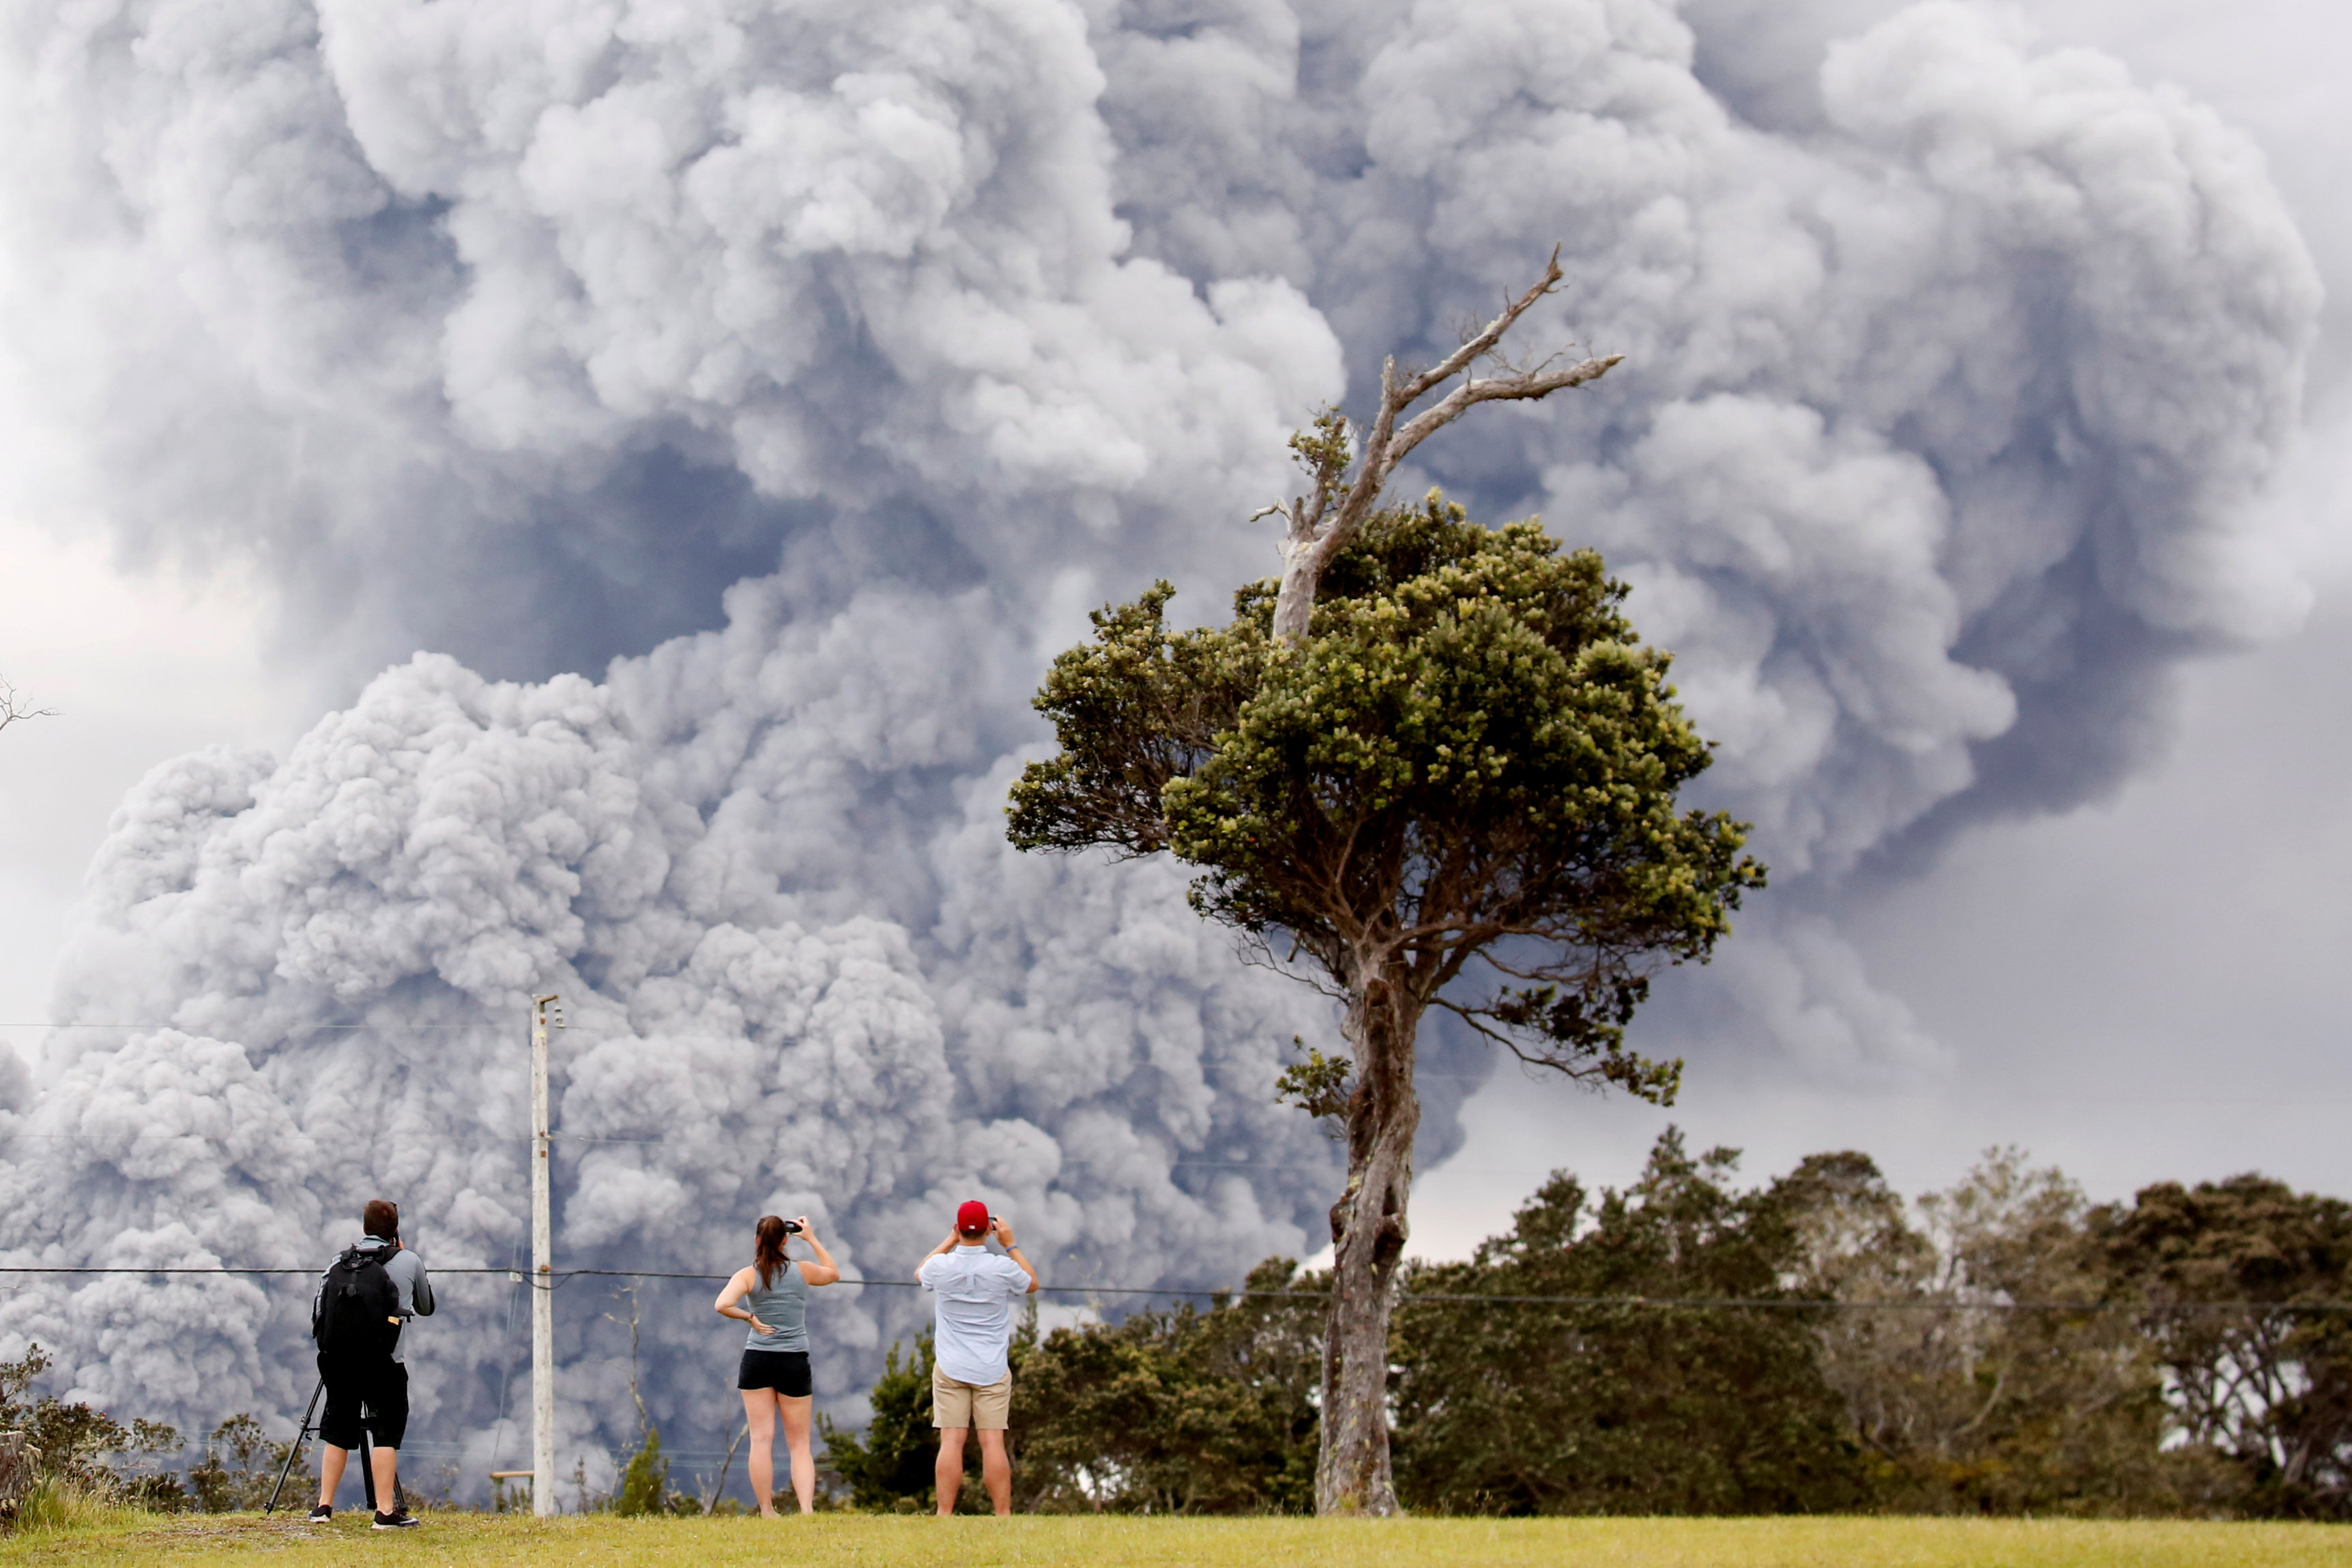 People watch as ash erupts from the Halemaumau crater near the community of Volcano